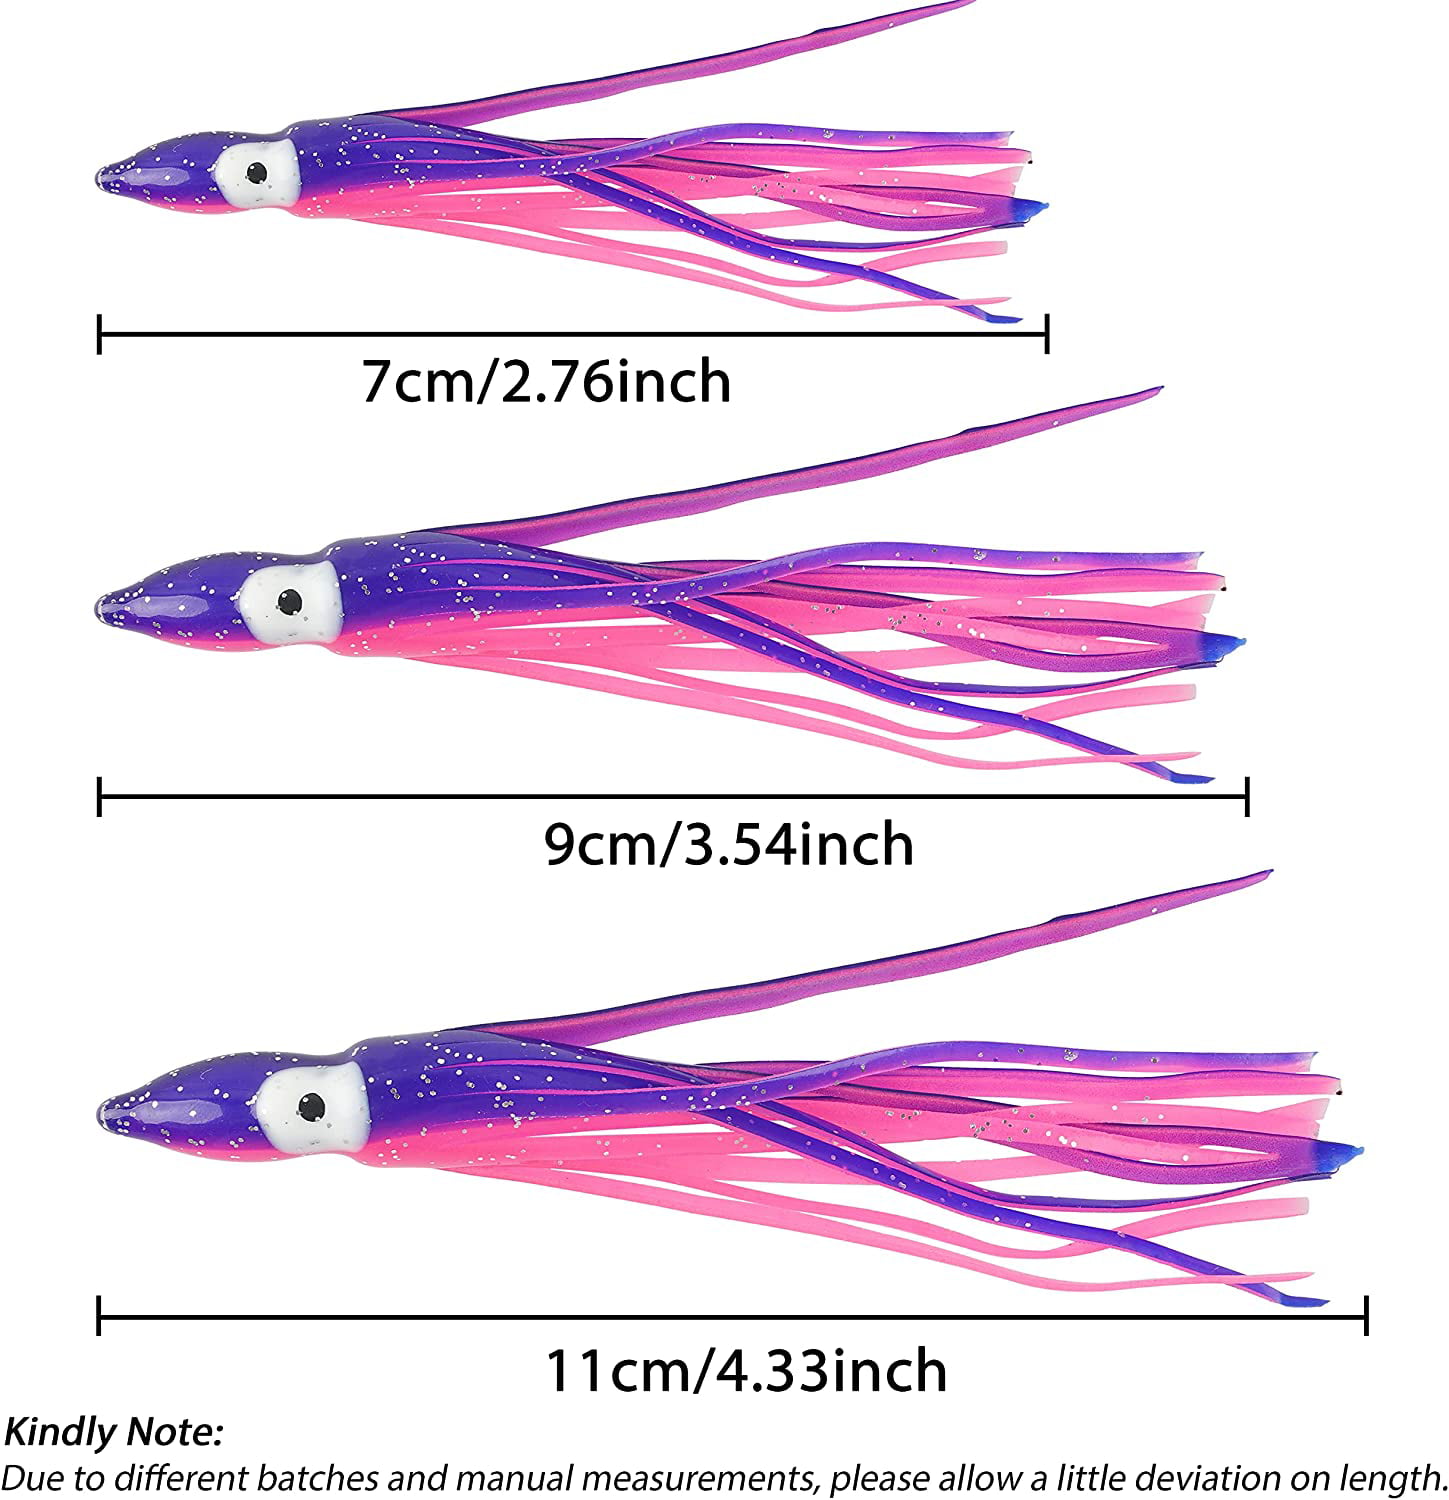 Lot Of 10 Hoochie Squid Skirts Un Rigged Fishing Lures 4 3/4" PEARL Hoochies 